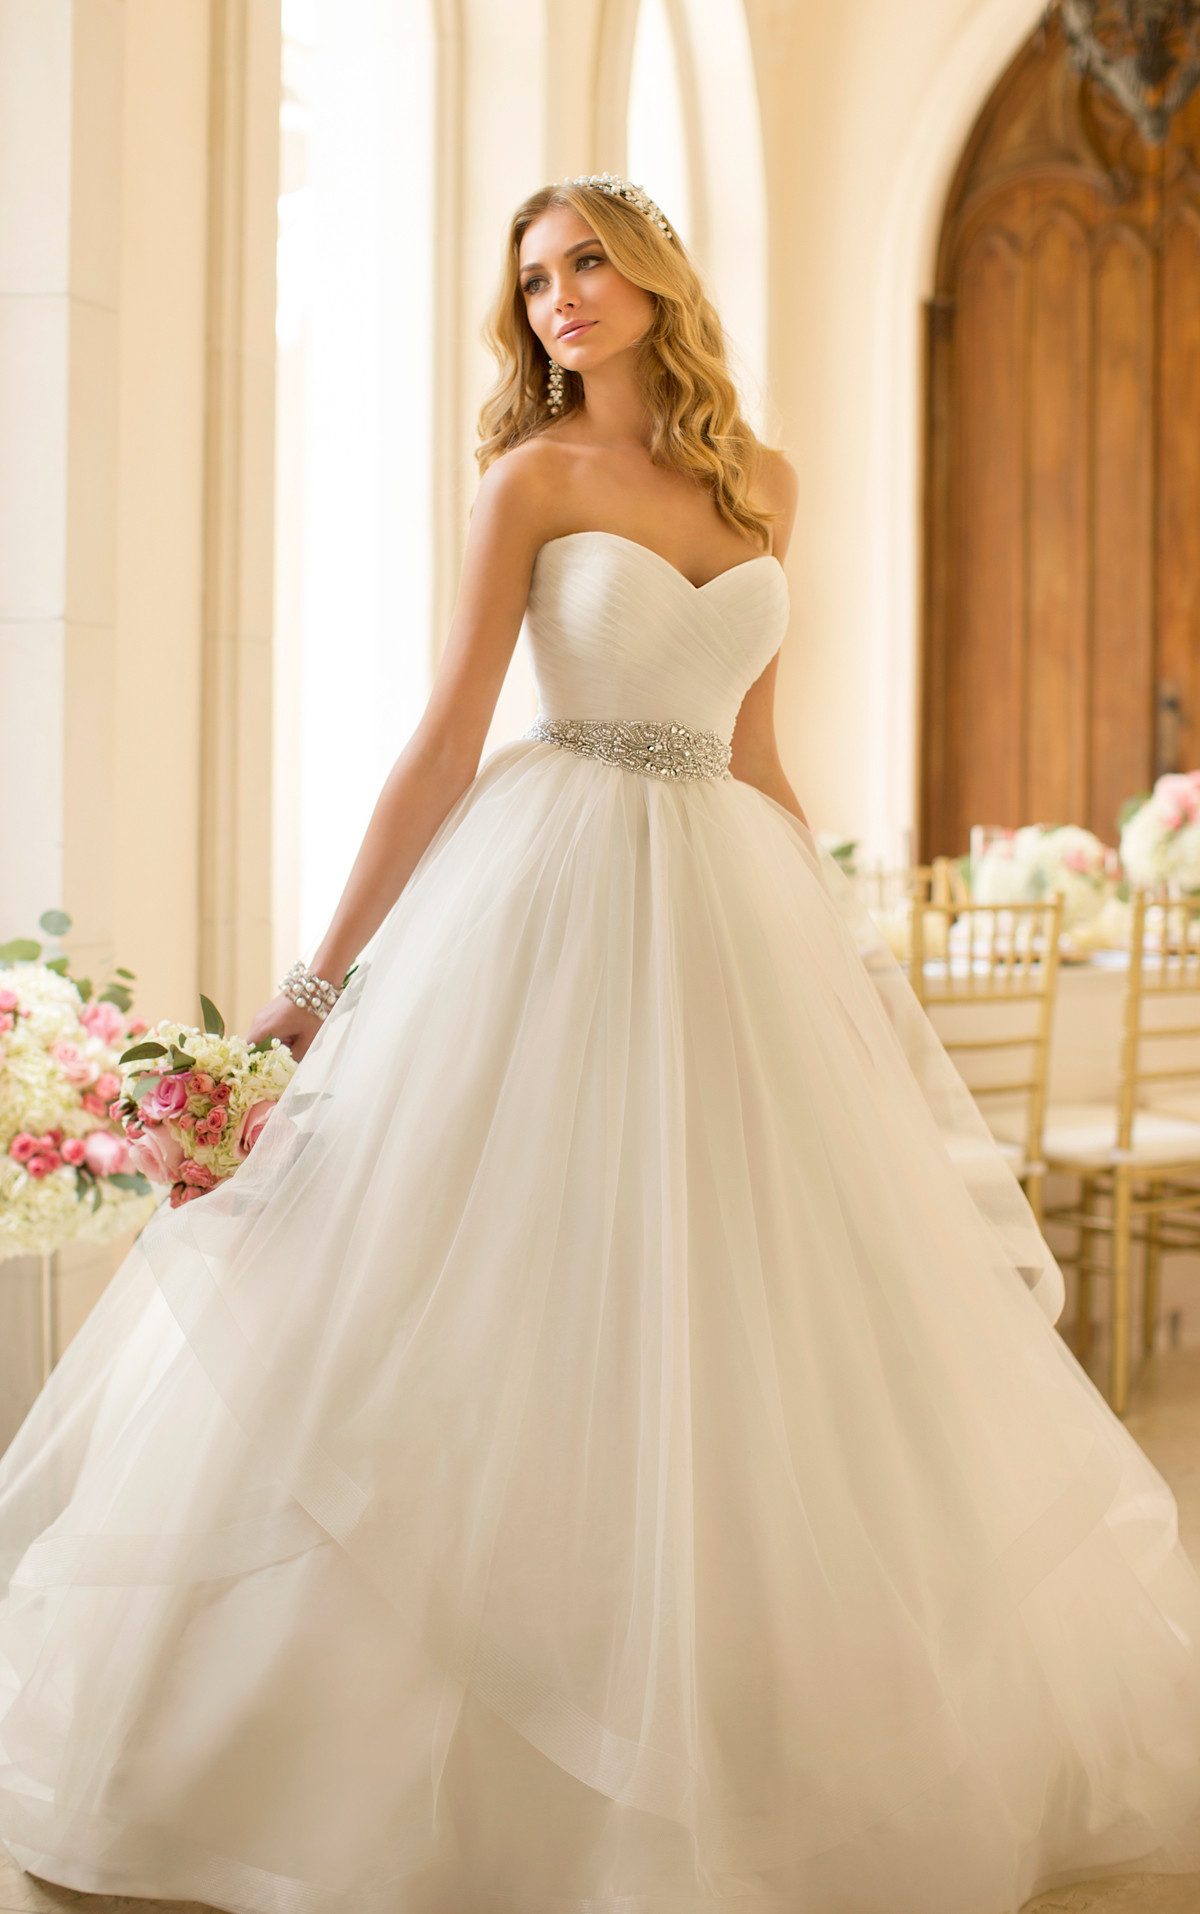 Designer Wedding Gowns
 The Best Gowns from The Most In Demand Wedding Dress